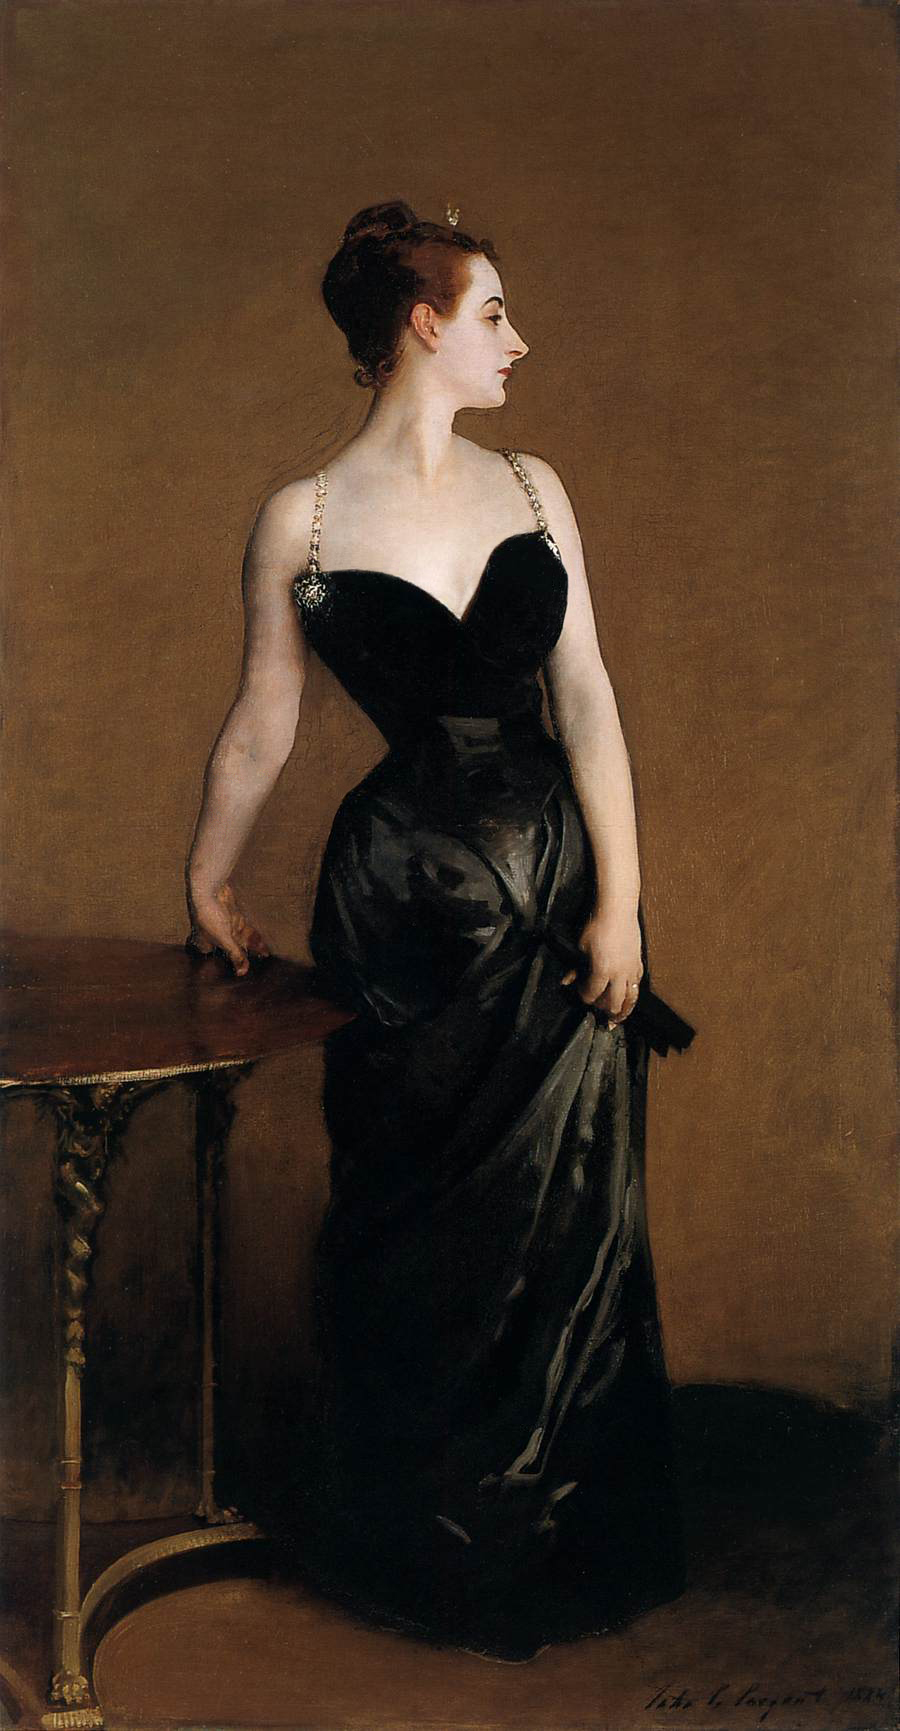 Sargent's portrait
                          of Madame X, for L. Abel's critical Aesthetic
                          Realism art essay Realism Essay on Assertion
                          and Retreat in Woman